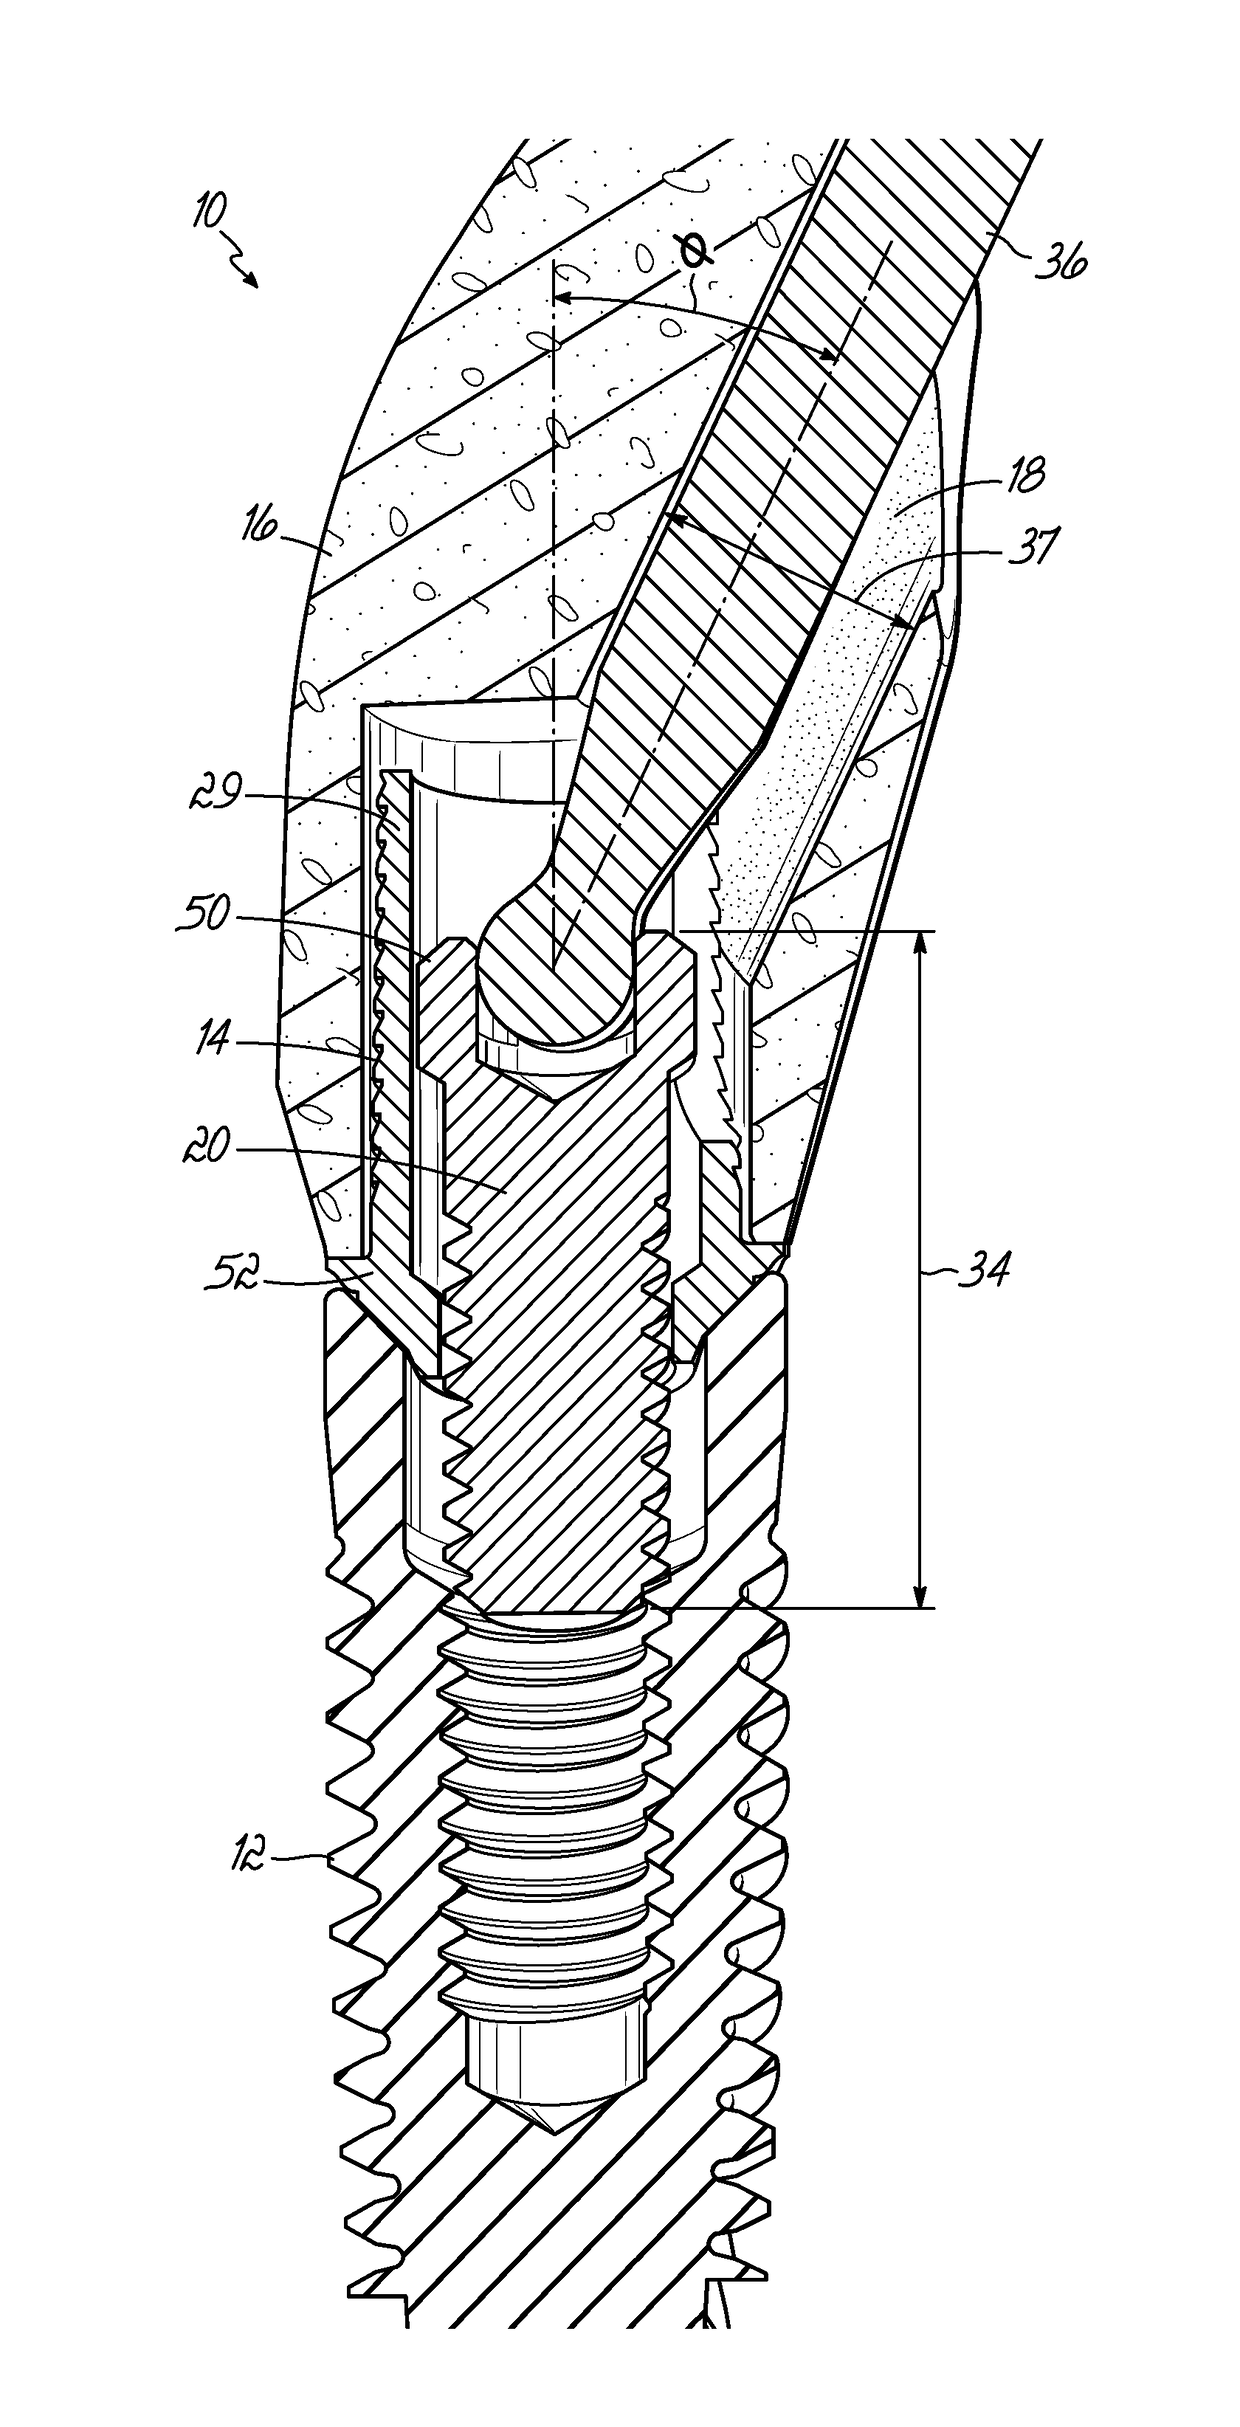 Screw-retained abutment with off-axis feature and methods of making and using same